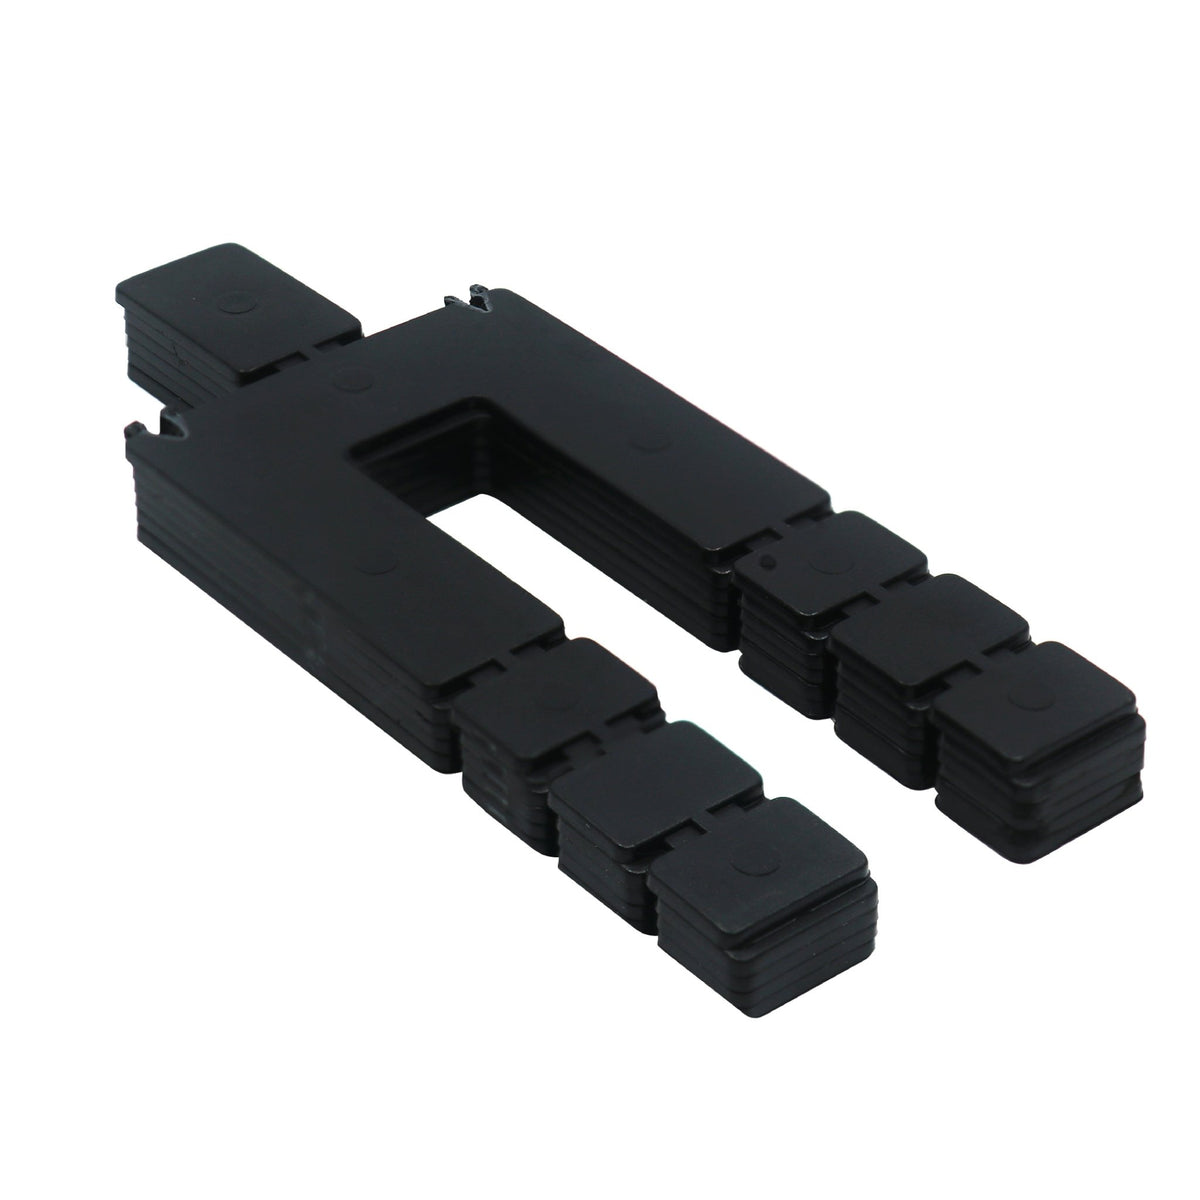 Plastic Structural Shimstack - 16 Pack - Adjustable Plastic Shims - 1/16” Thickness with 5/8 “ Slot Width - SHIM-116 - Picture Hang Solutions